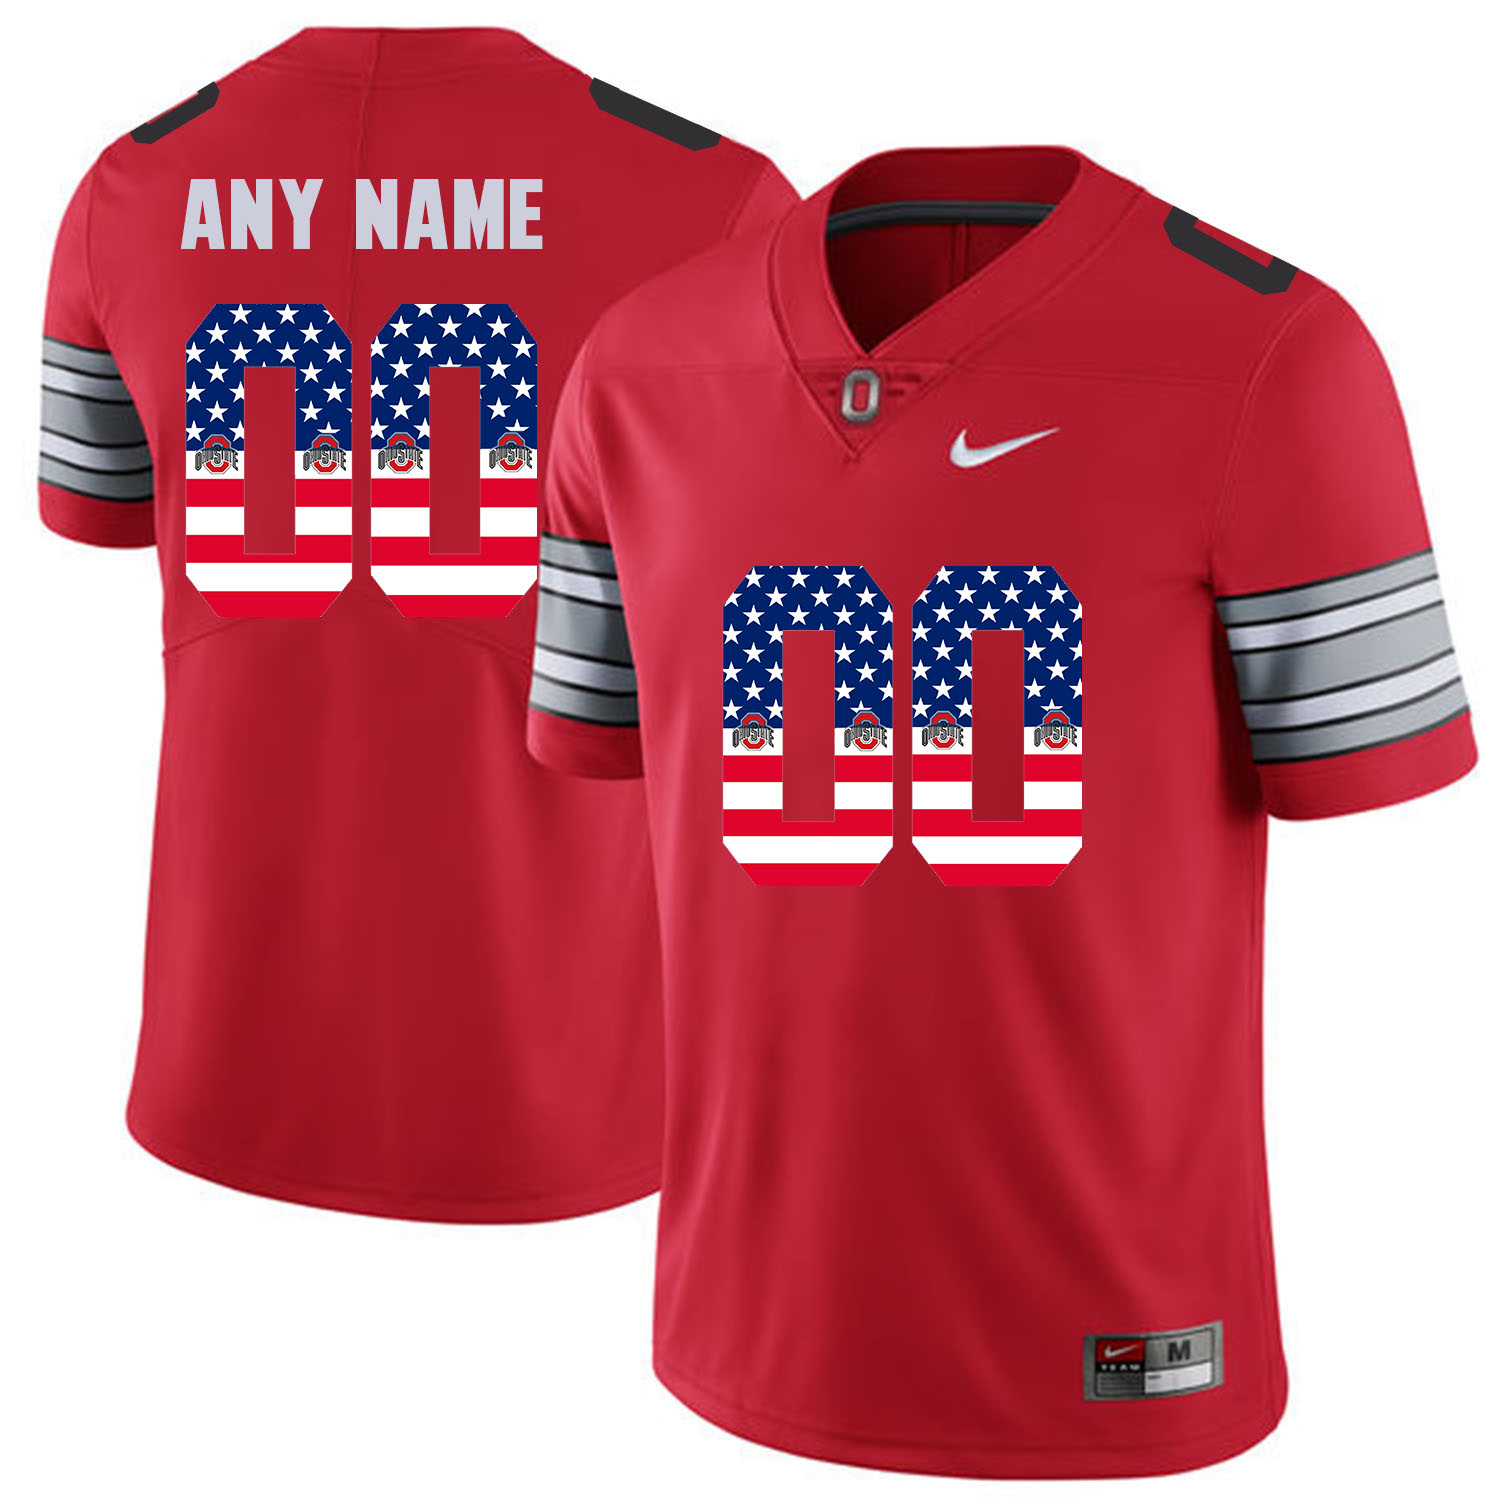 Men Ohio State 00 Any name Red Flag Customized NCAA Jerseys